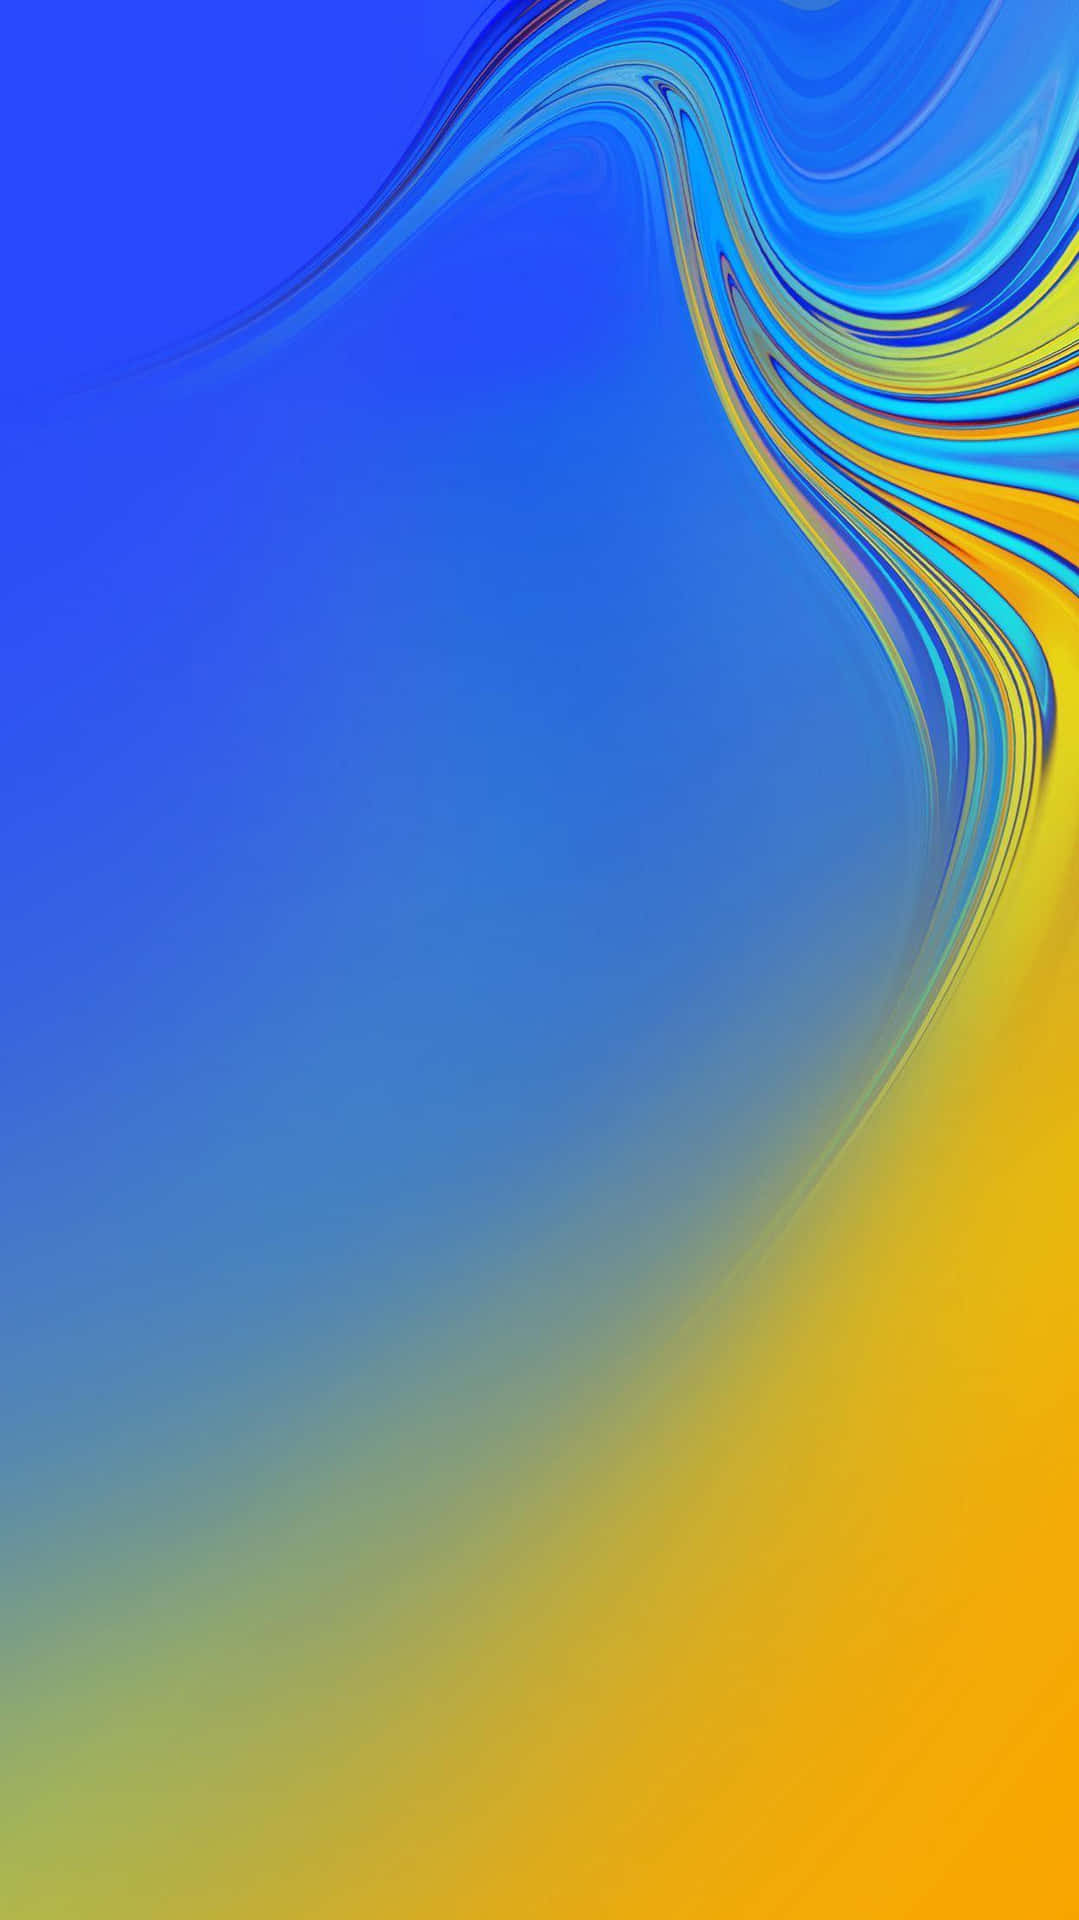 A Blue And Yellow Background With A Wave Wallpaper